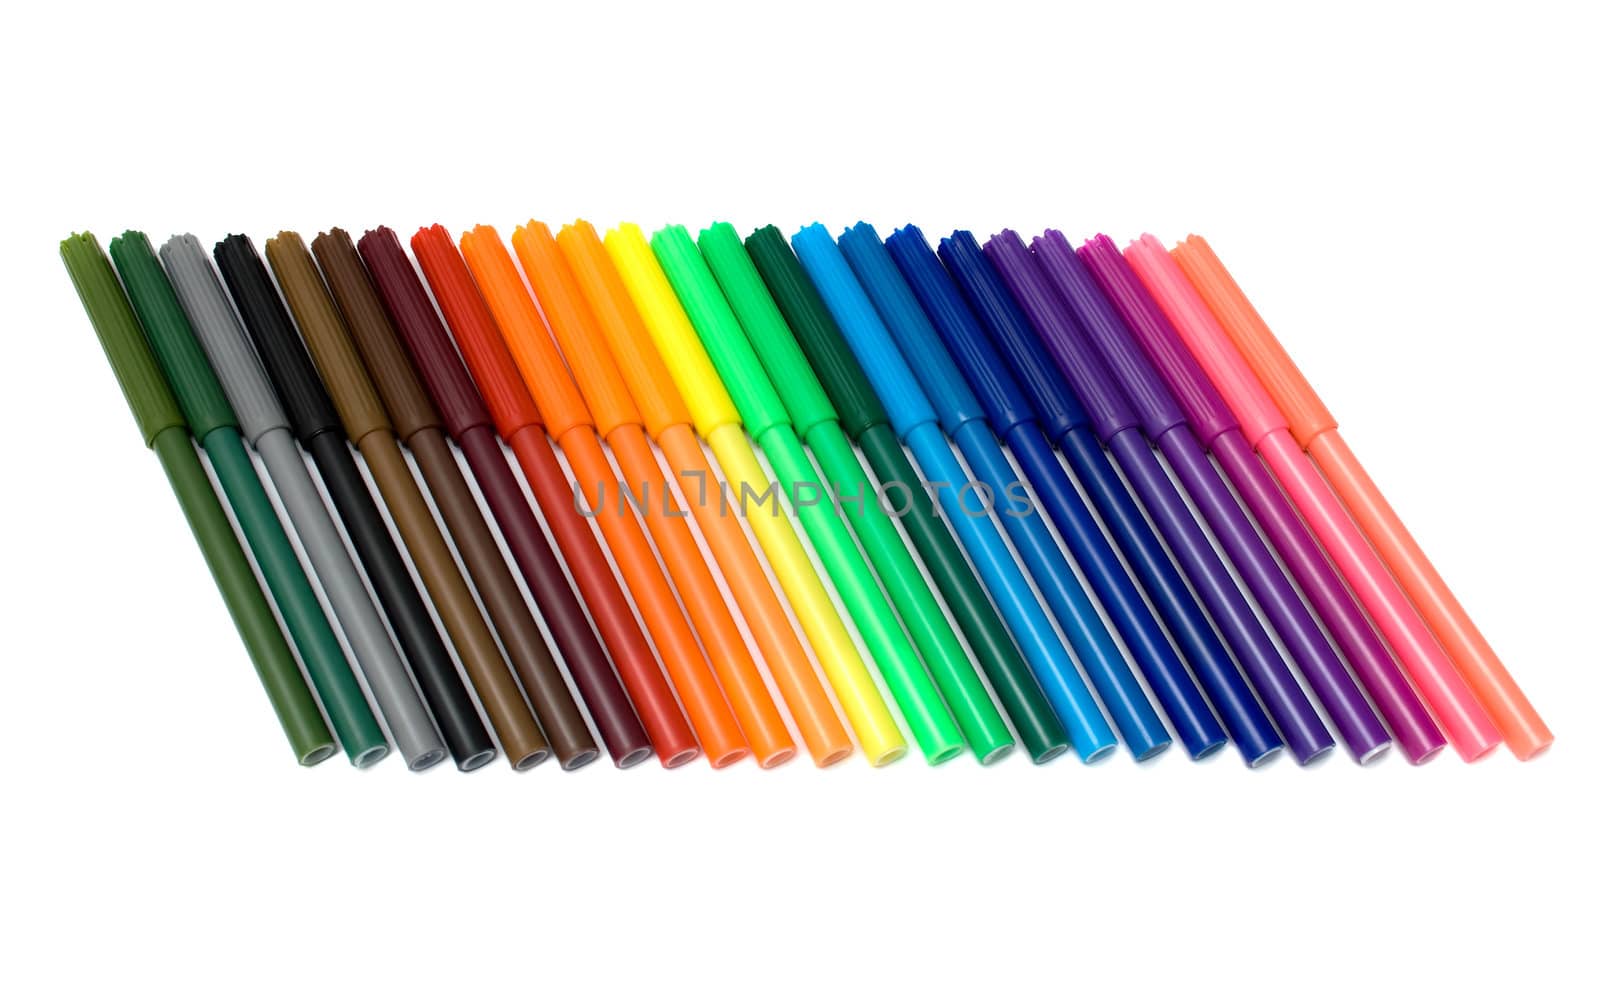 Colored felt tip pens in a row on white background